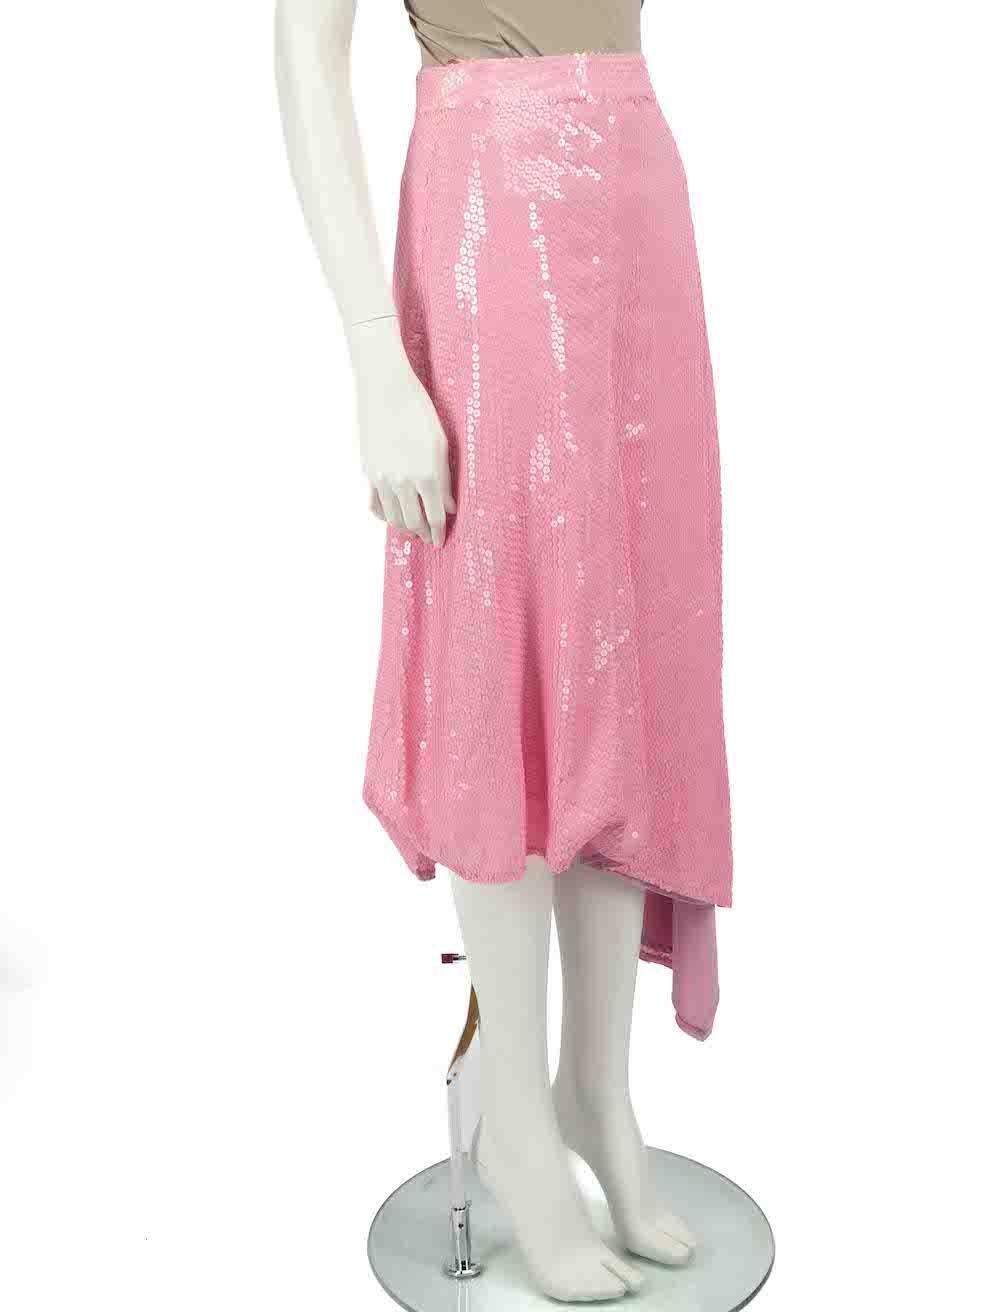 CONDITION is Very good. Minimal wear to skirt is evident. Minimal wear to a small amount of missing sequins on this used MSGM designer resale item.
 
 
 
 Details
 
 
 Pink
 
 Viscose
 
 Skirt
 
 Sequinned
 
 Asymmetric drape detail hem
 
 Side zip